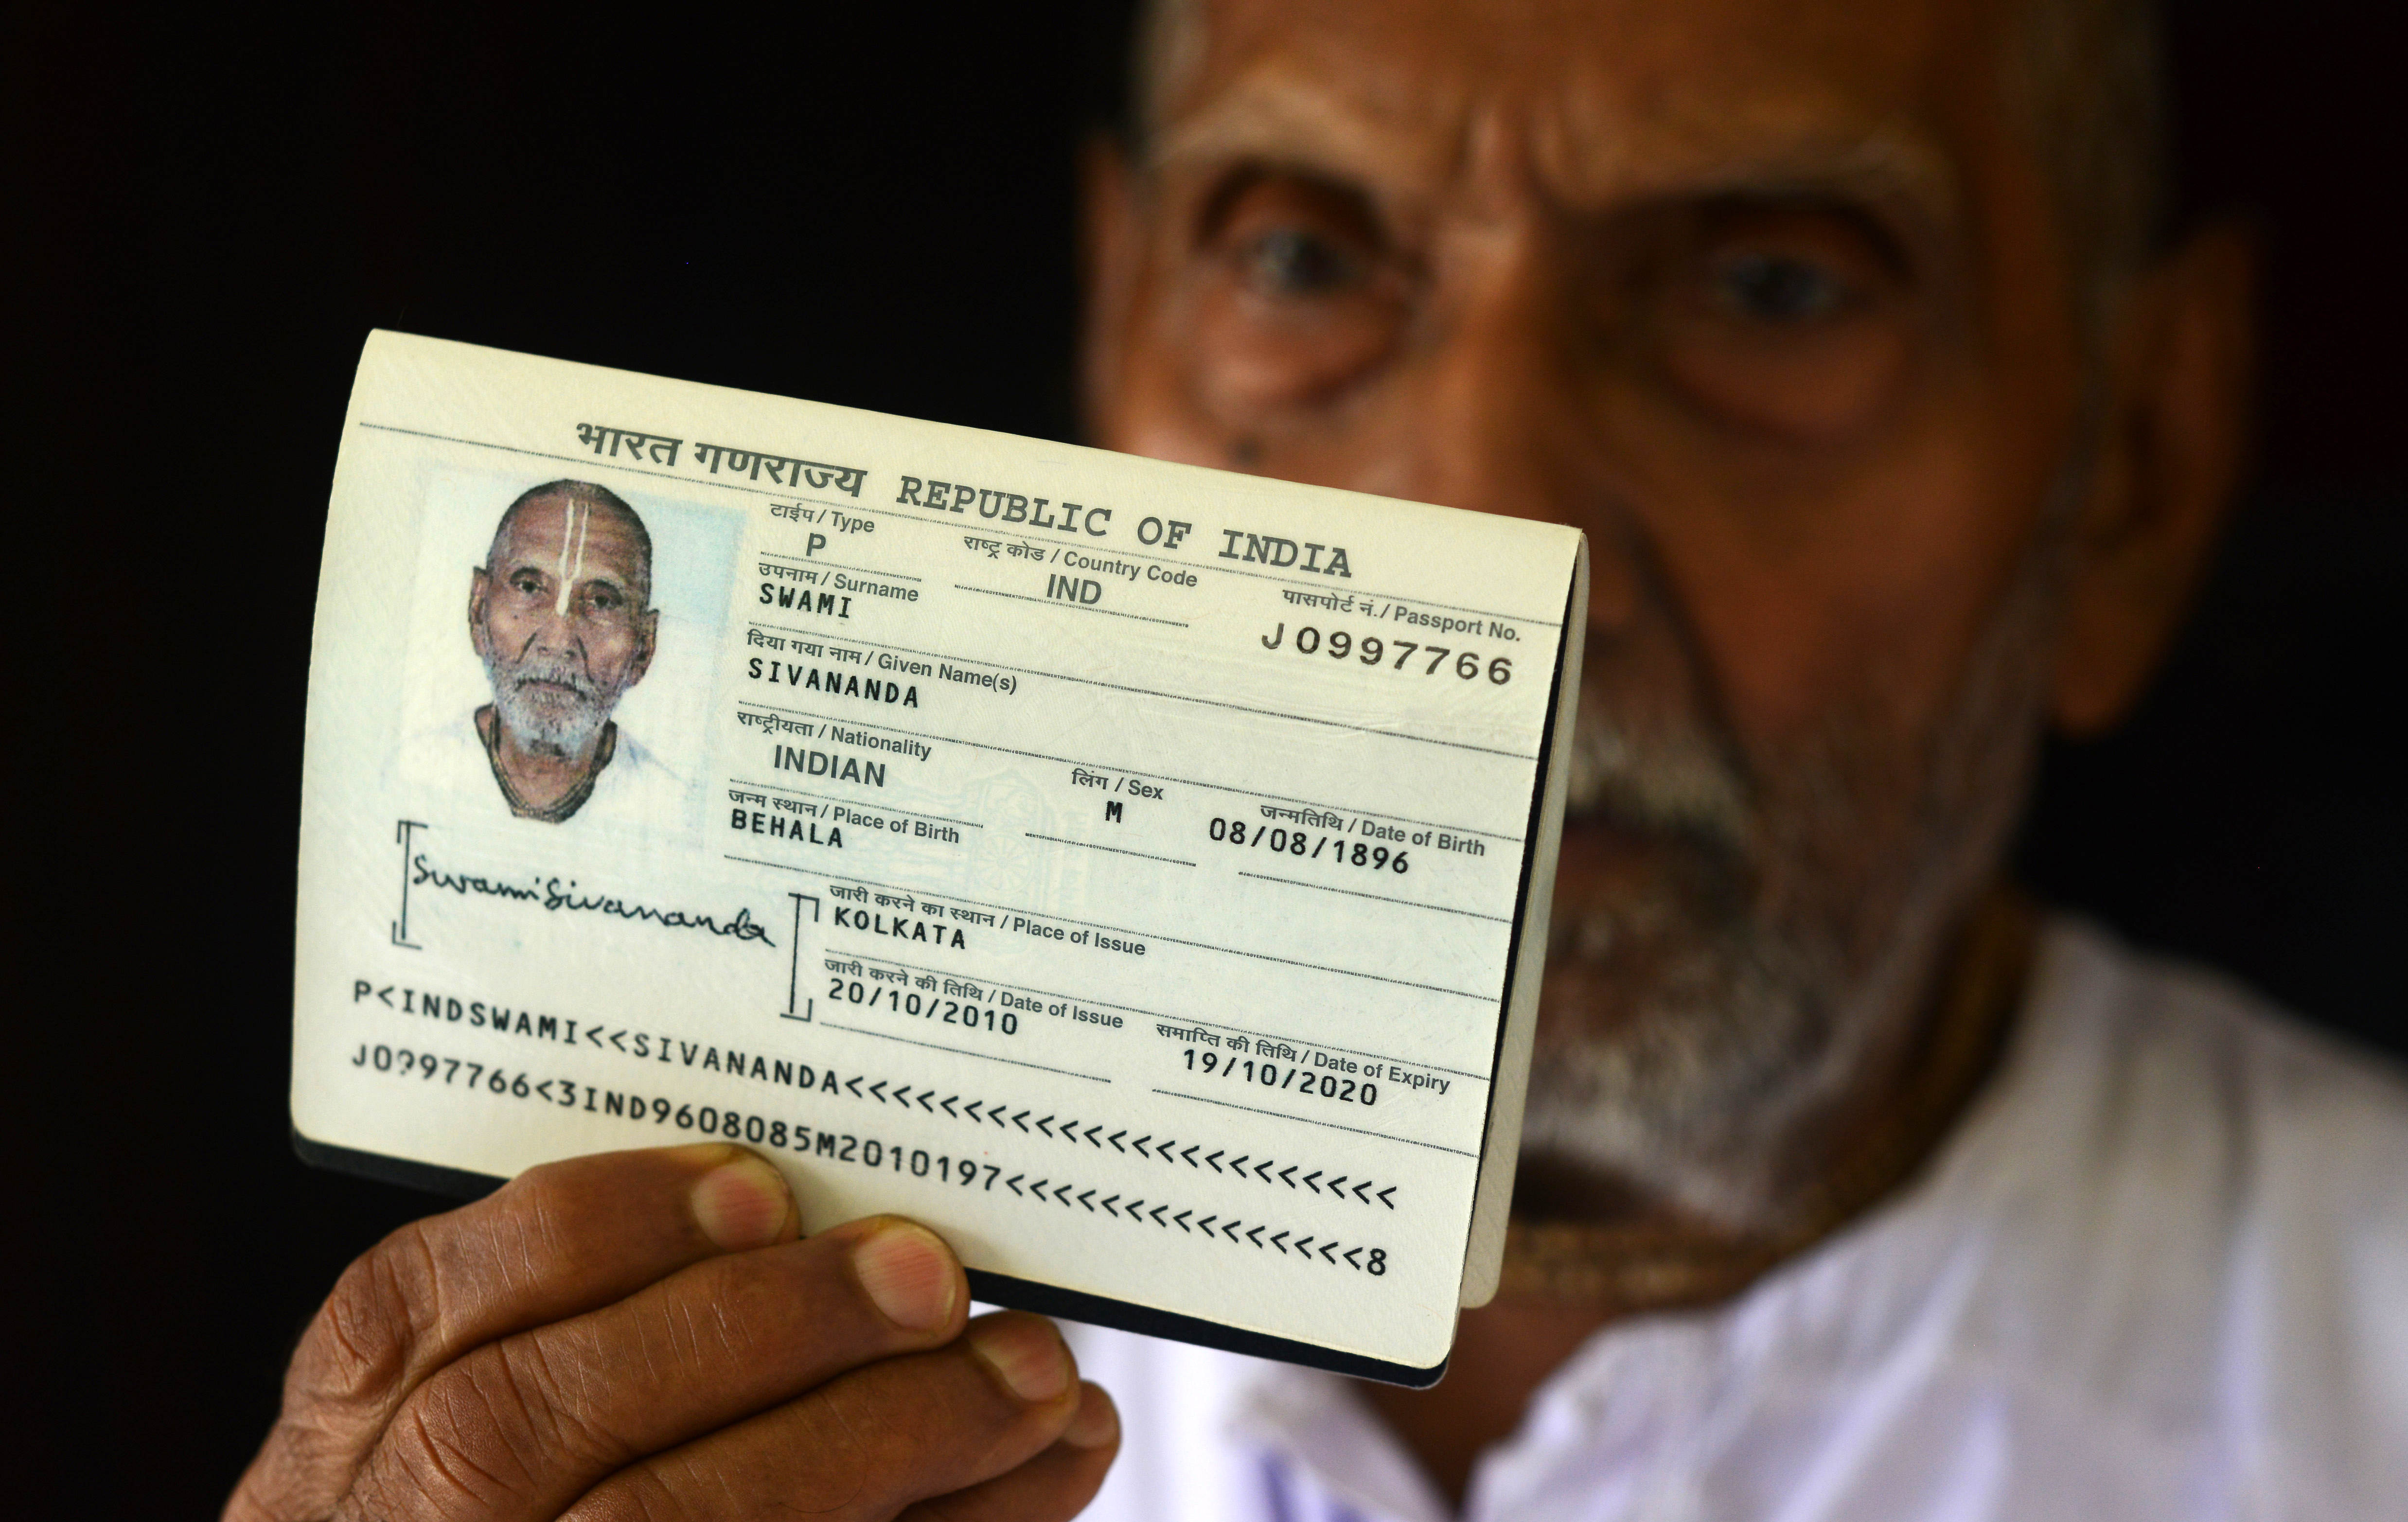 In this photograph taken on August 2, 2016, Indian monk Swami Sivananda, who claims to be 120 years old, holds up his passport in the house of one of his followers in Kolkata.   An Indian monk who claims to be the oldest man to have ever lived at 120 years, says he owes his longevity to daily yoga and a life without sex or spices. Born on August 8, 1896, according to his passport, Hindu monk Swami Sivananda's life has spanned three centuries. He is now applying to Guinness World Records to stake his claim to the distinction.  / AFP PHOTO / Dibyangshu SARKAR / TO GO WITH AFP STORY:  ' India-Lifestyle-Oldest-Man' Feature by Dibyangshu SARKAR